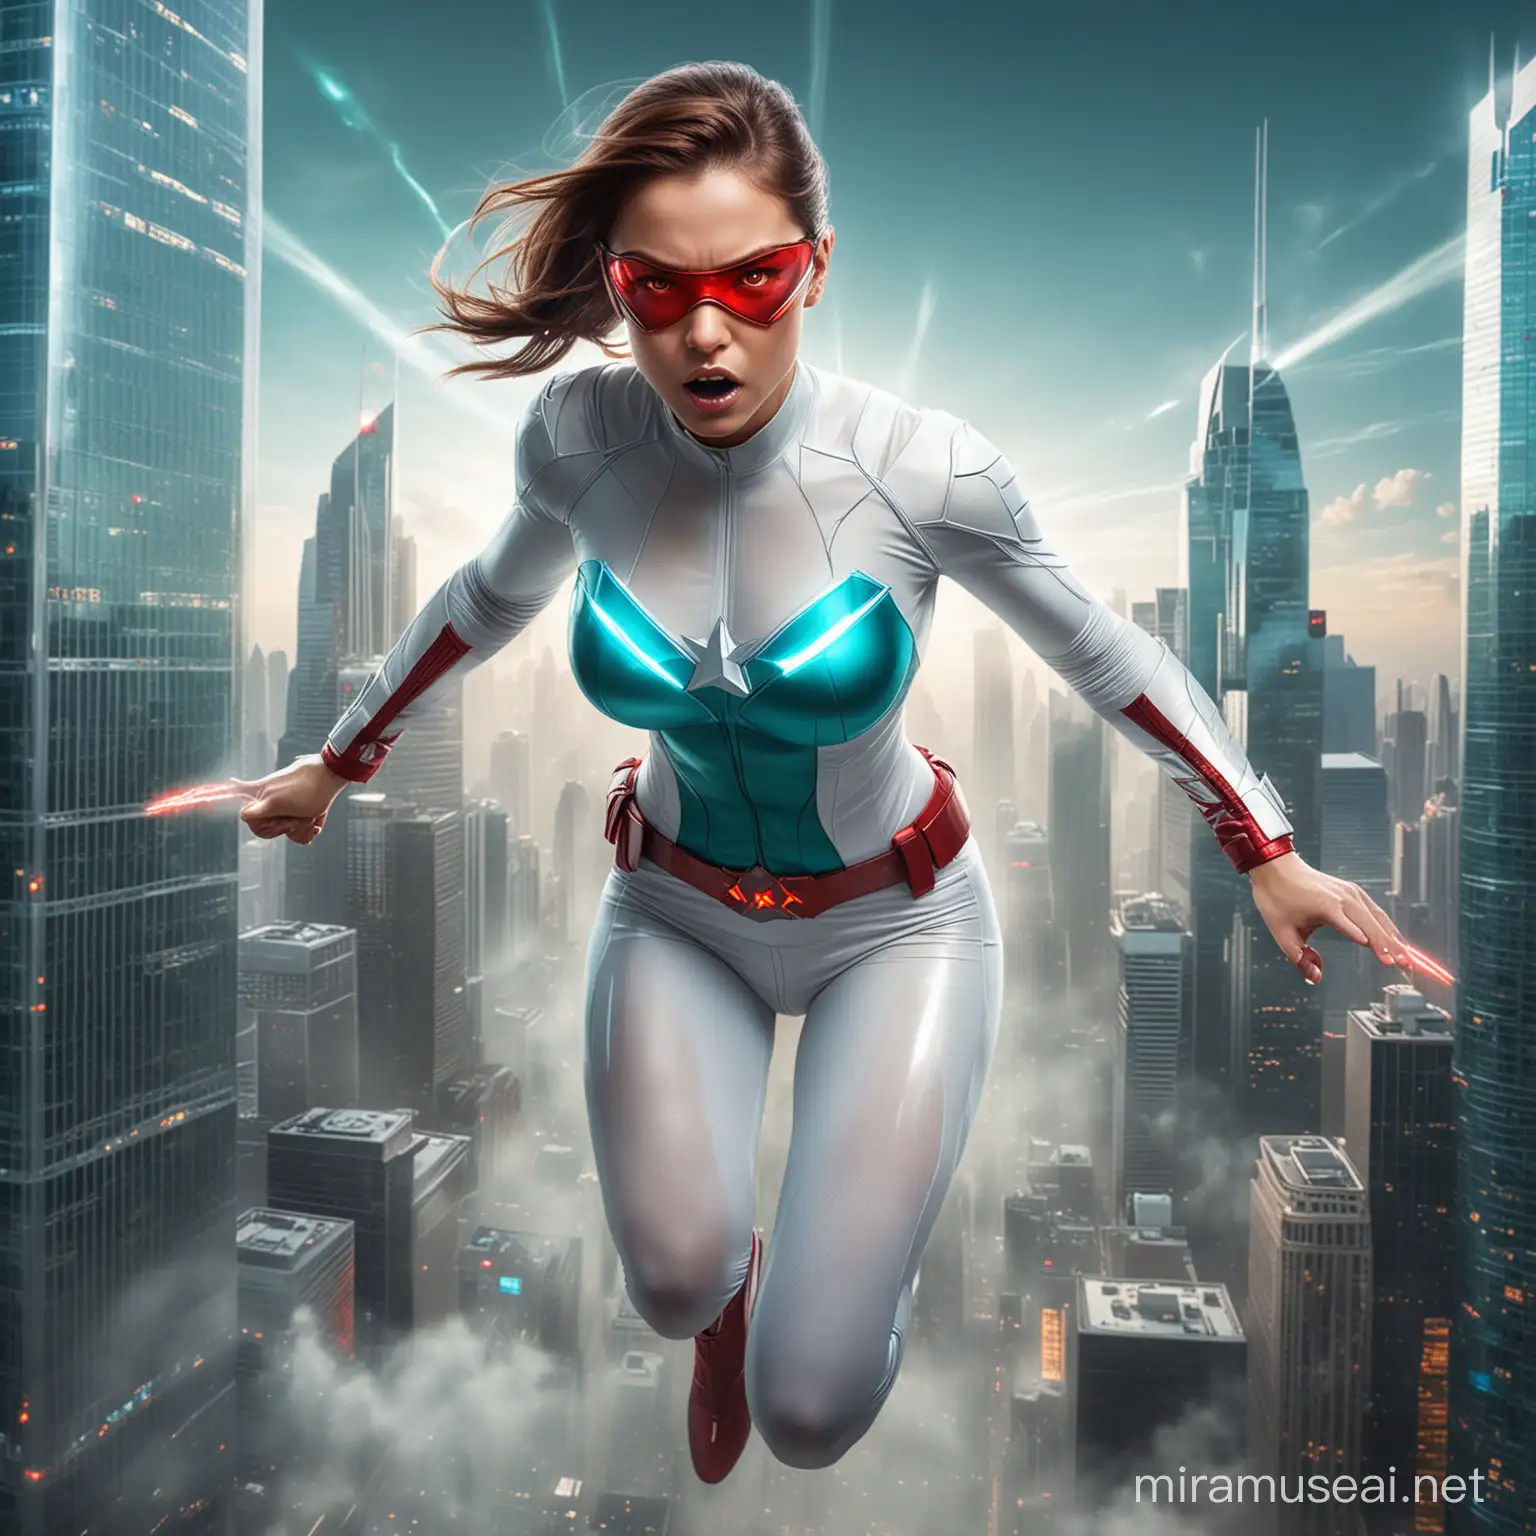 Angry Female Superhero with Glowing Red Laser Eyes Flying Over City Skyscrapers